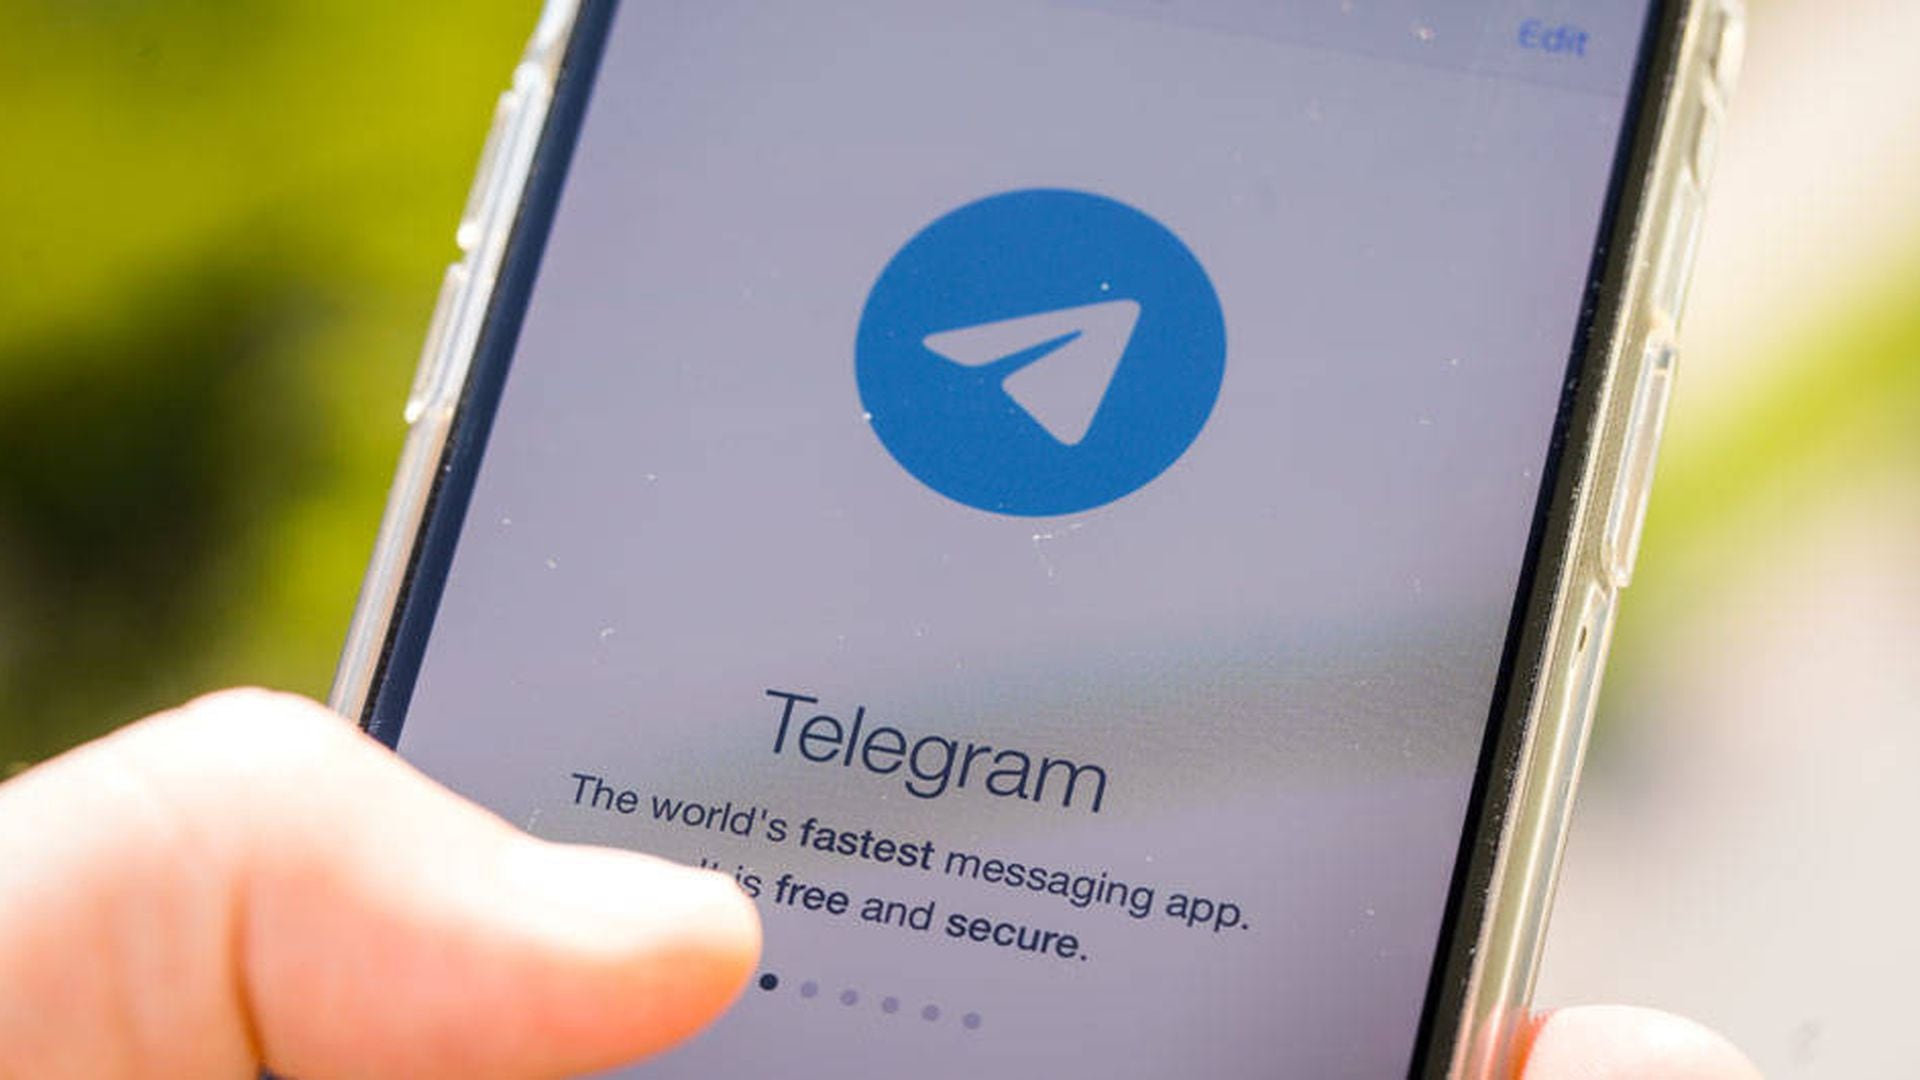 TELEGRAM ADDS CRYPTO TO ITS SERVICE